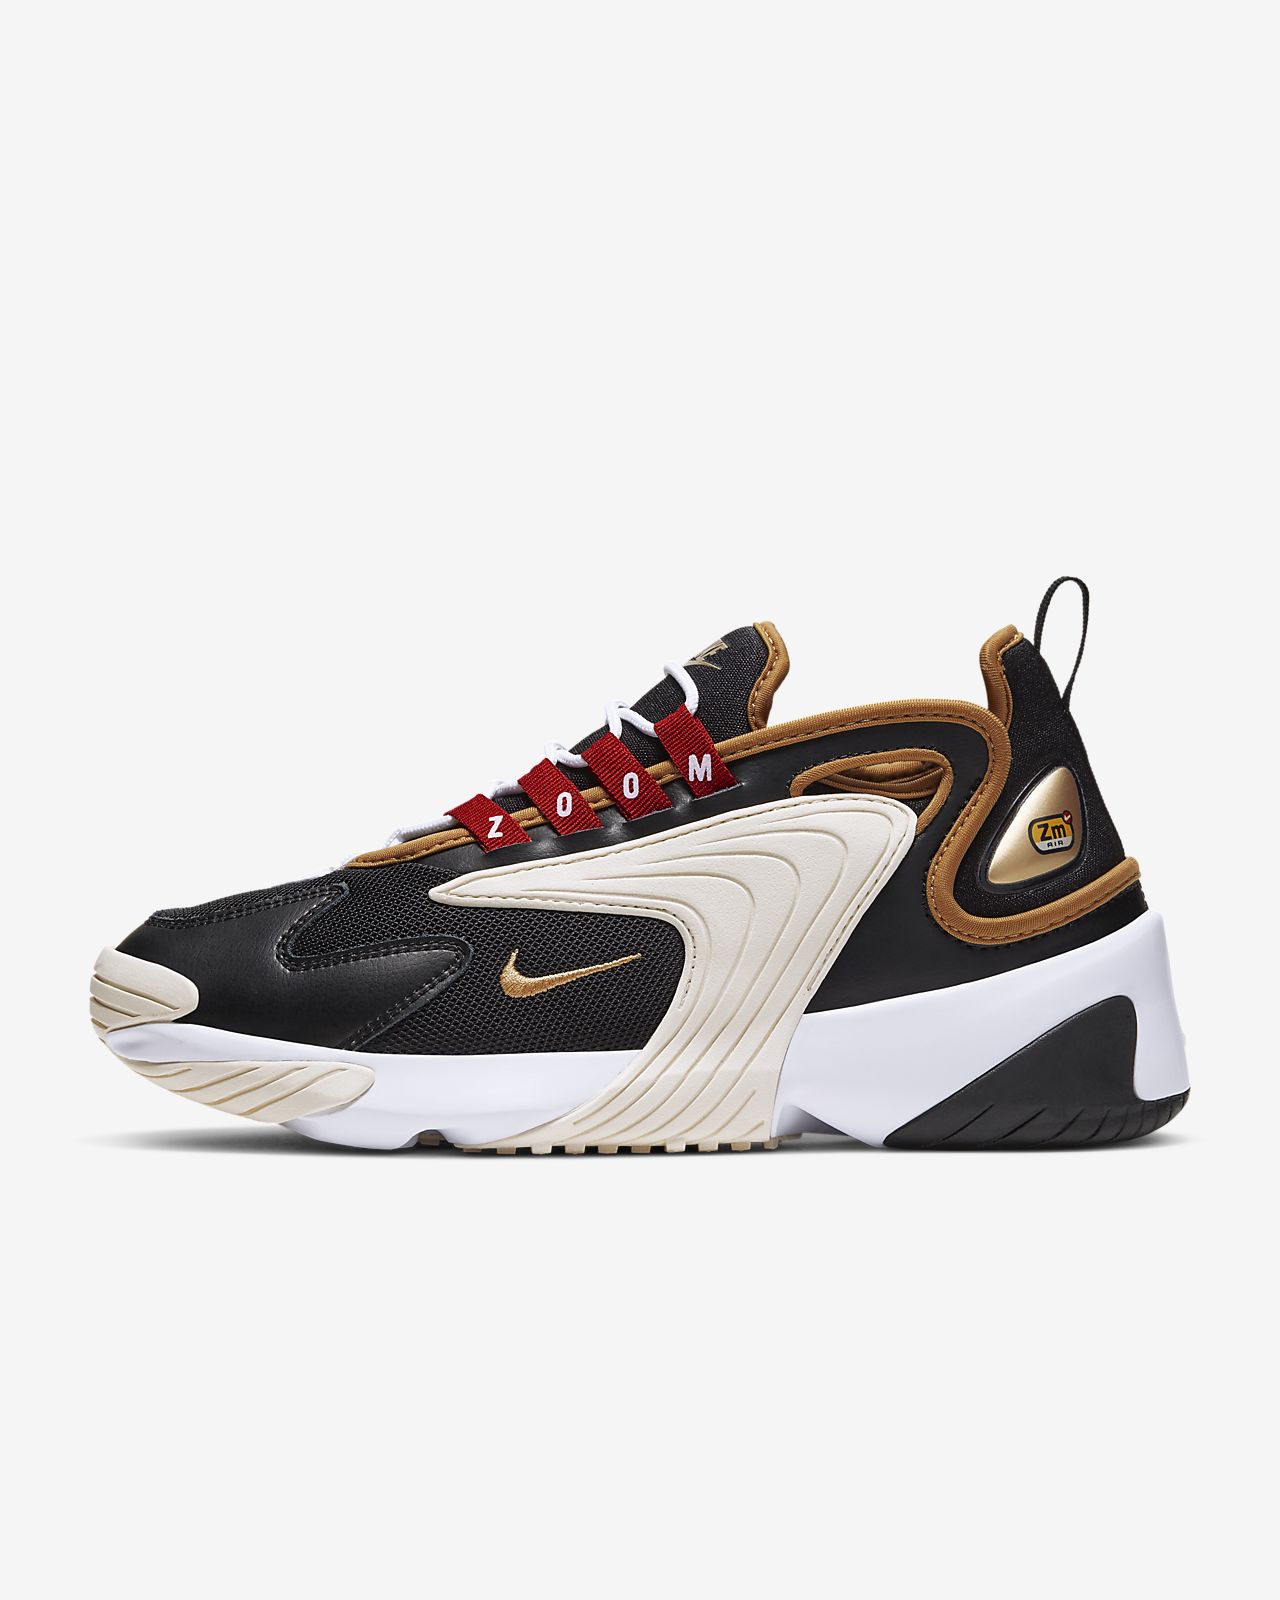 Purchase > nike zoom 2k femme promo, Up to 61% OFF